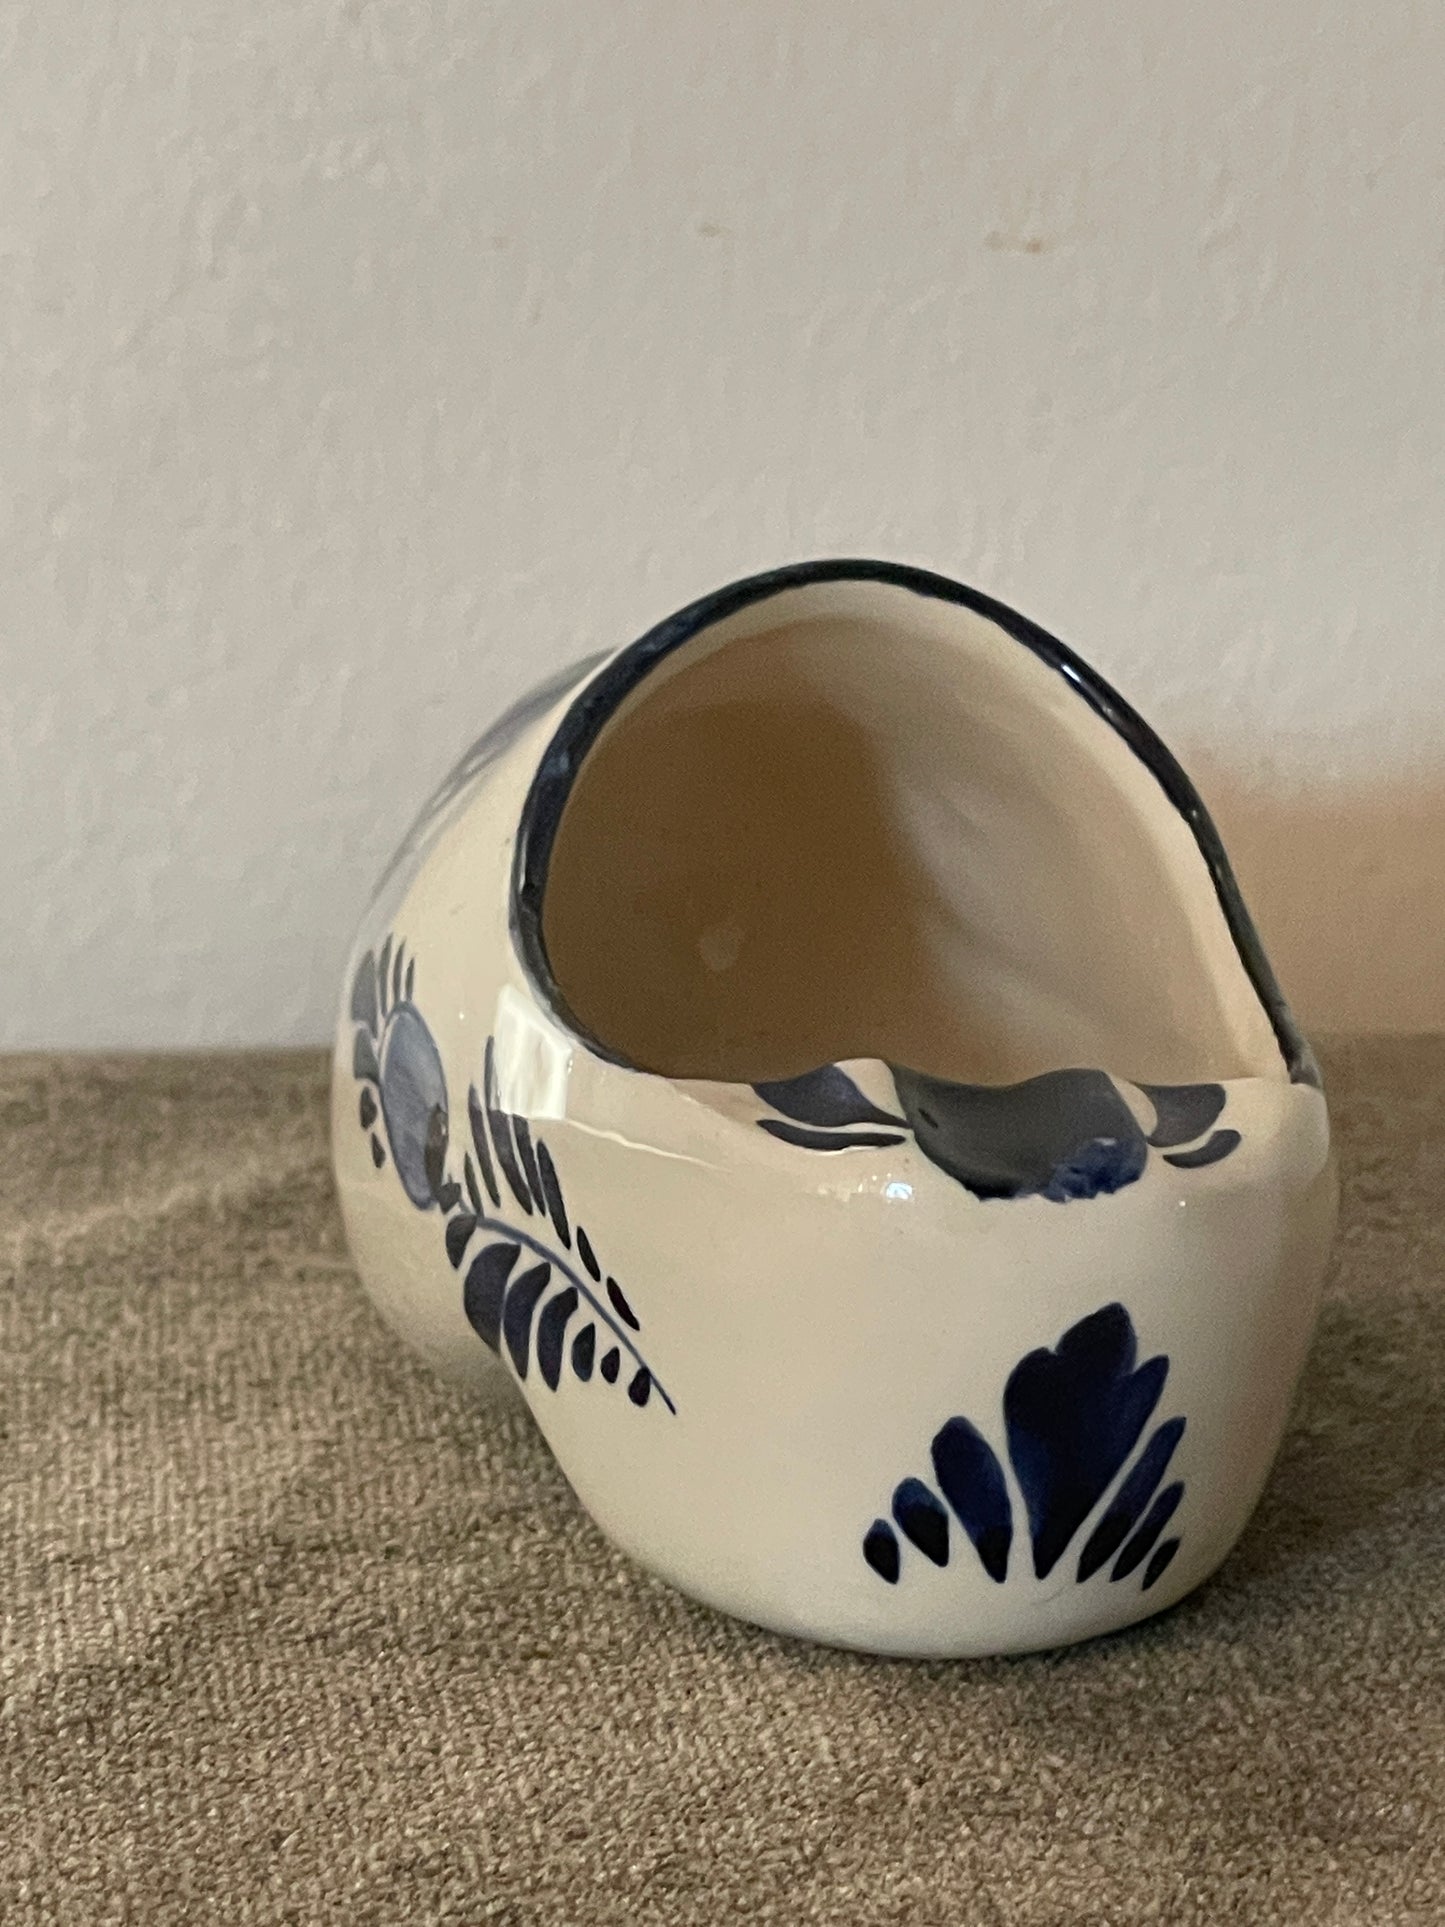 Delft Porcelain Clog Ash tray  Handpainted in Holland